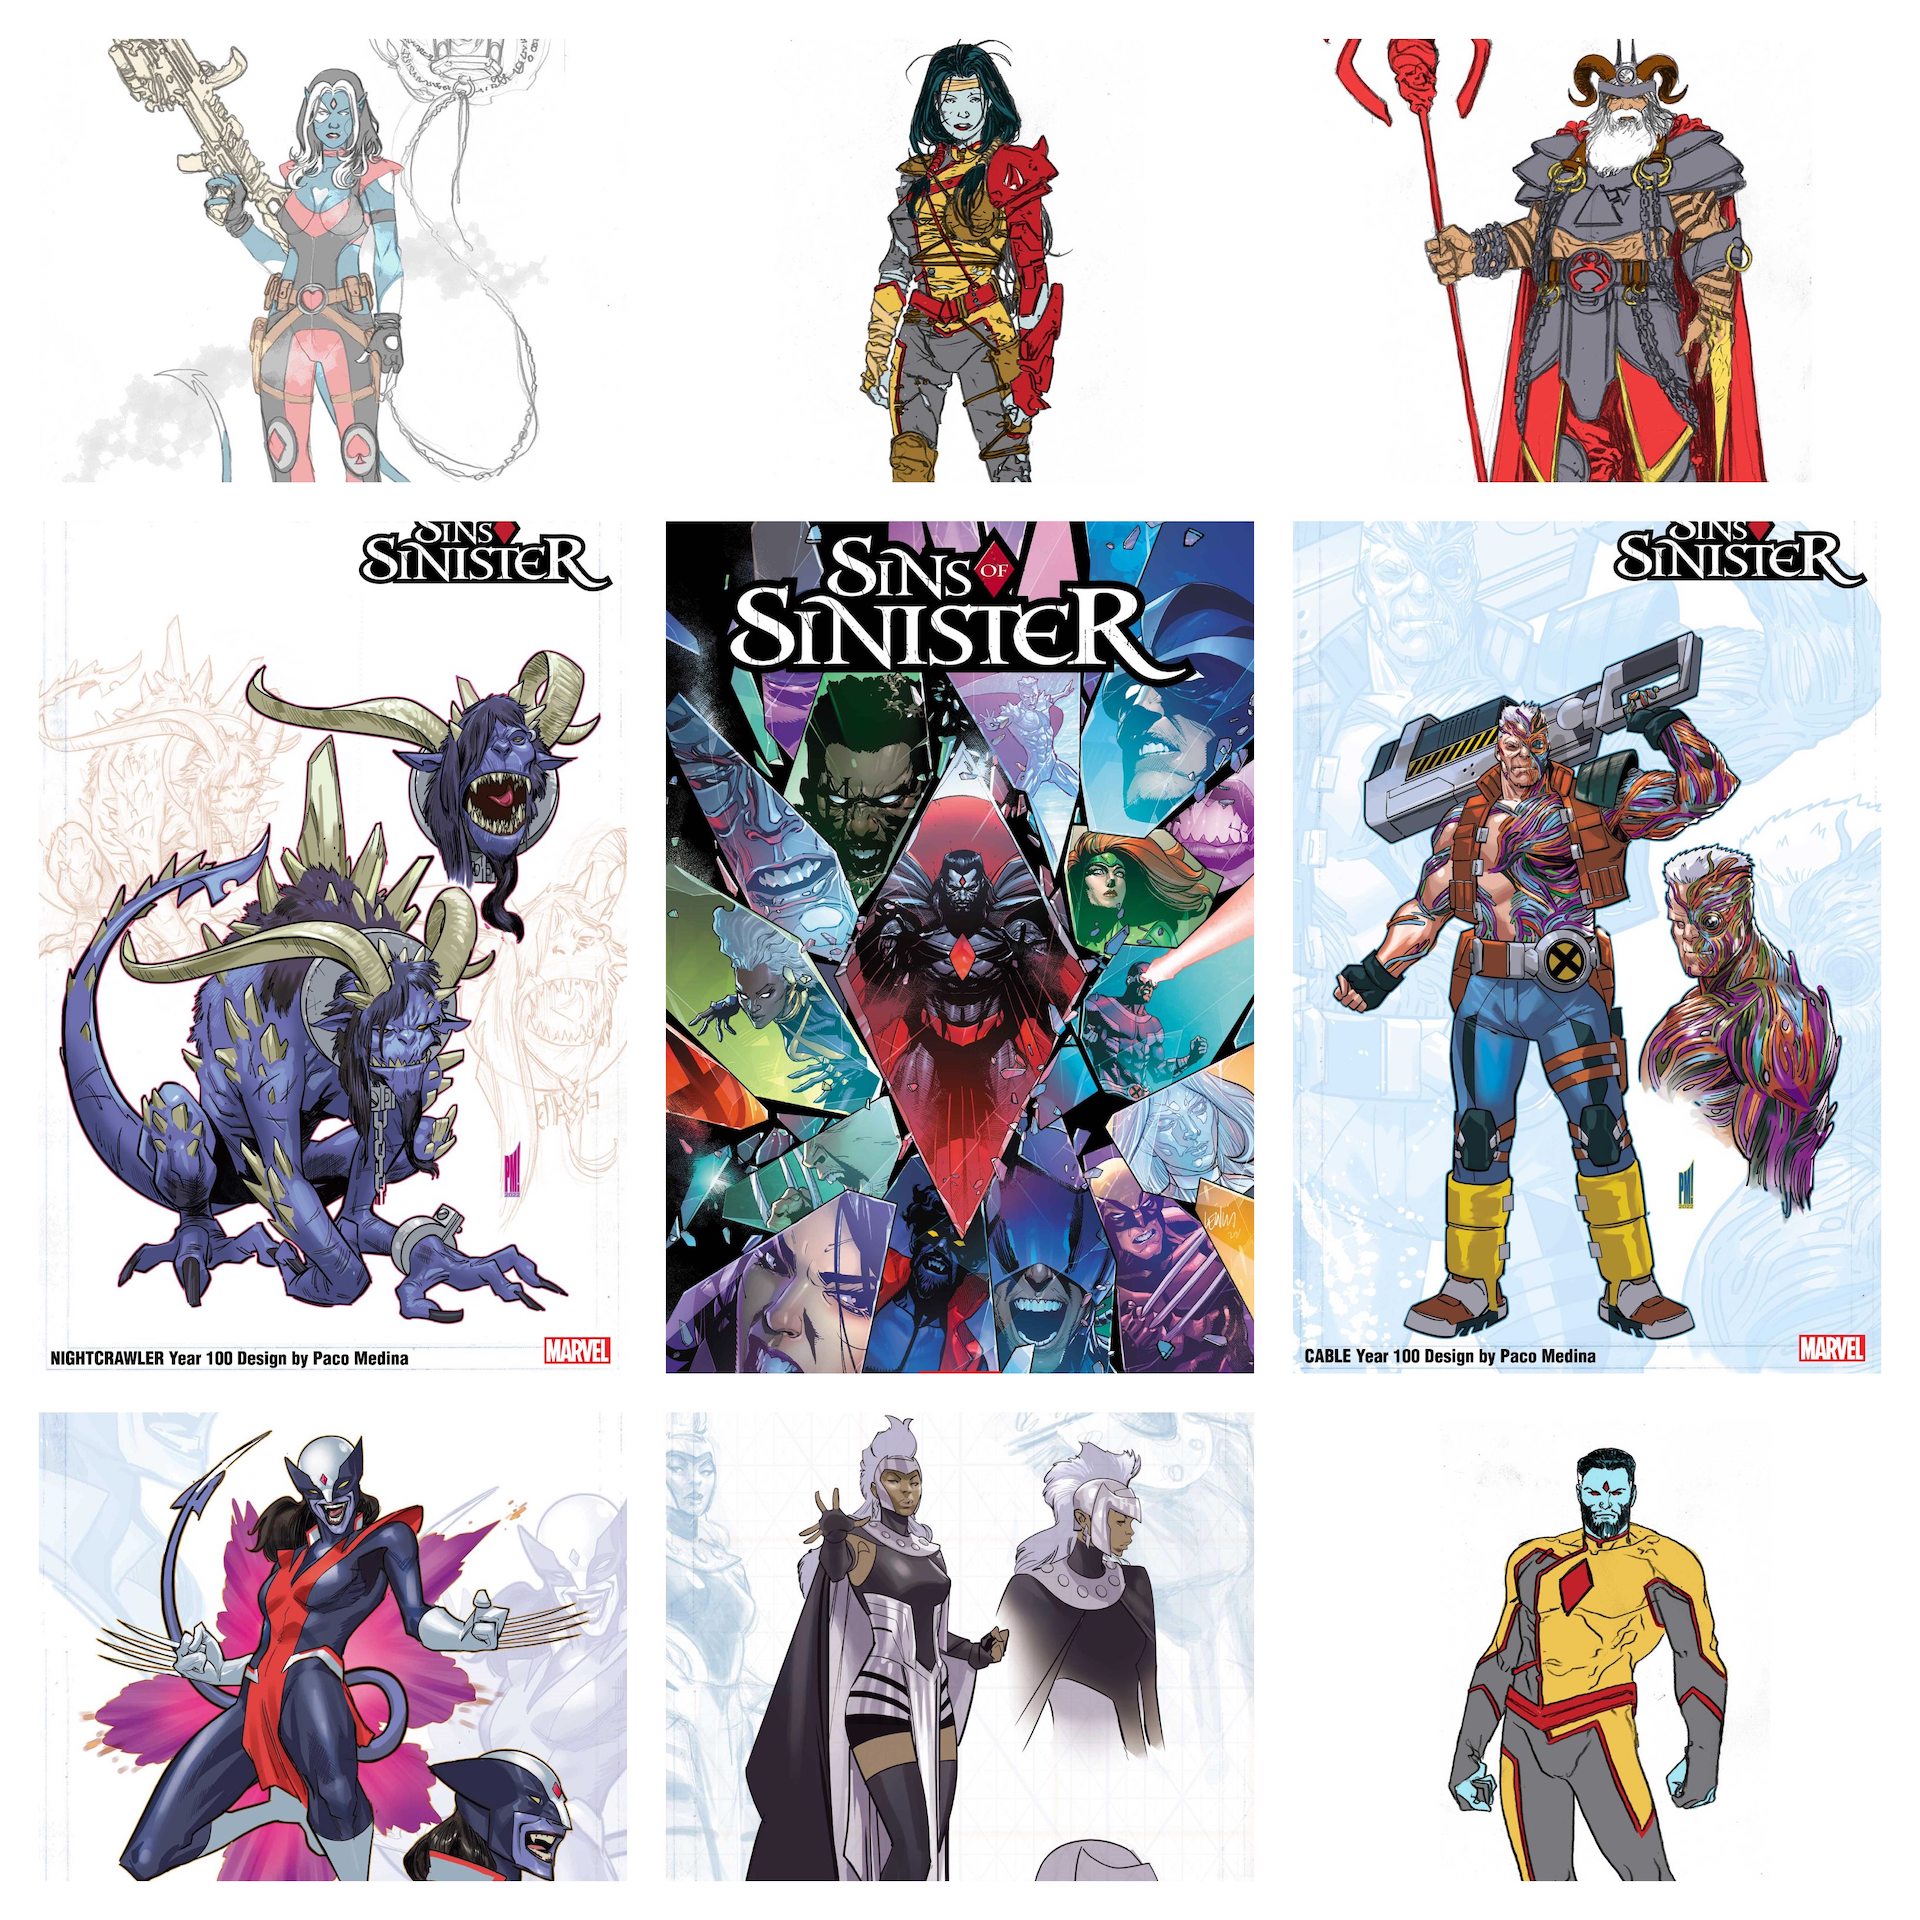 Marvel releases Paco Medina and Alessandro Vitti's 'Sins of Sinister' character designs